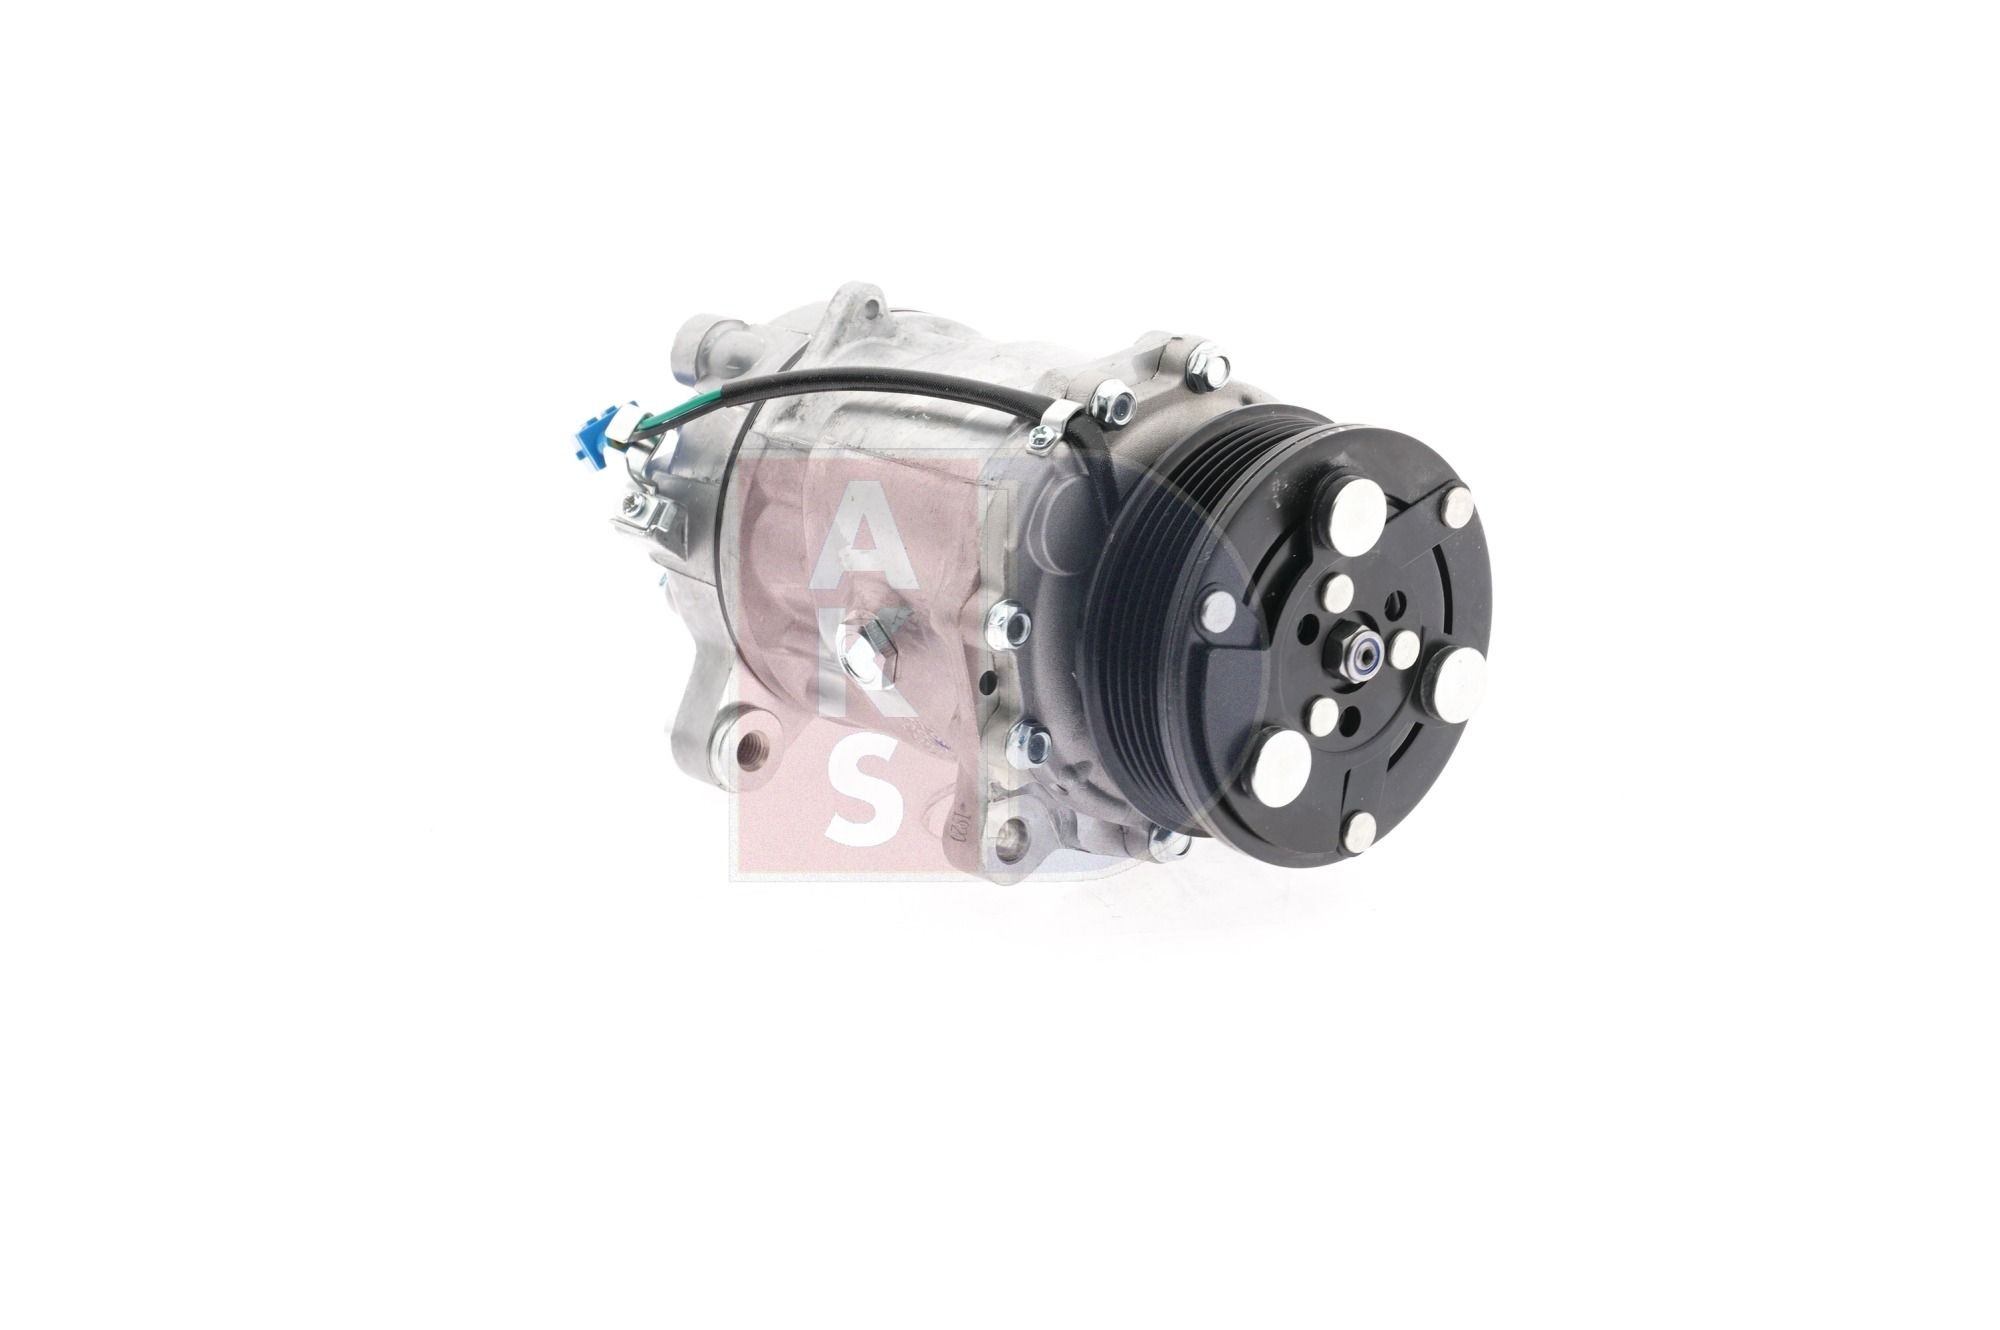 Air conditioning compressor 850240N from AKS DASIS